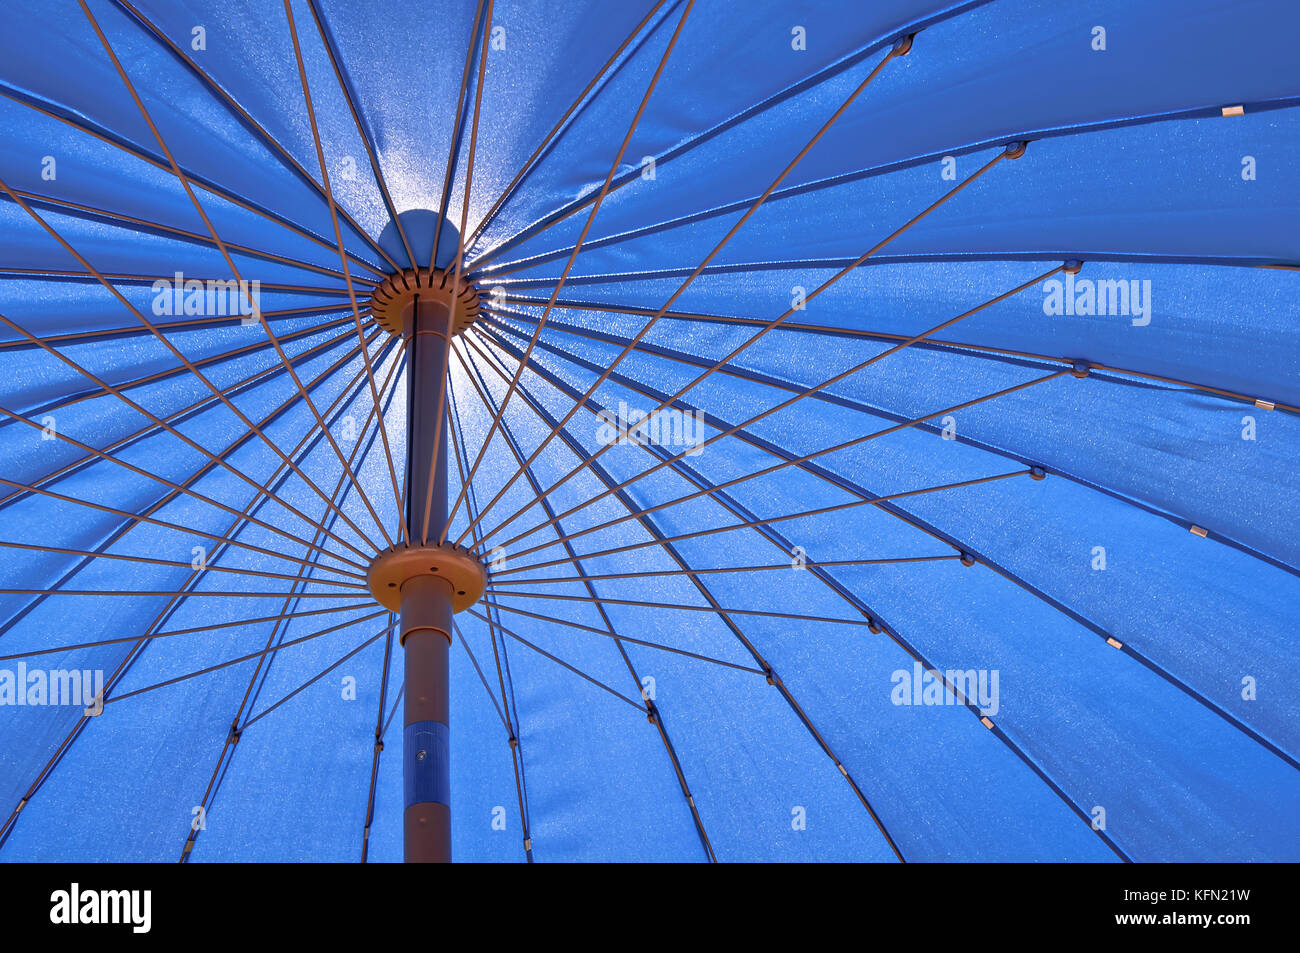 View from under the umbrella on a clear summer day. The sun shines through the garden umbrella. Stock Photo